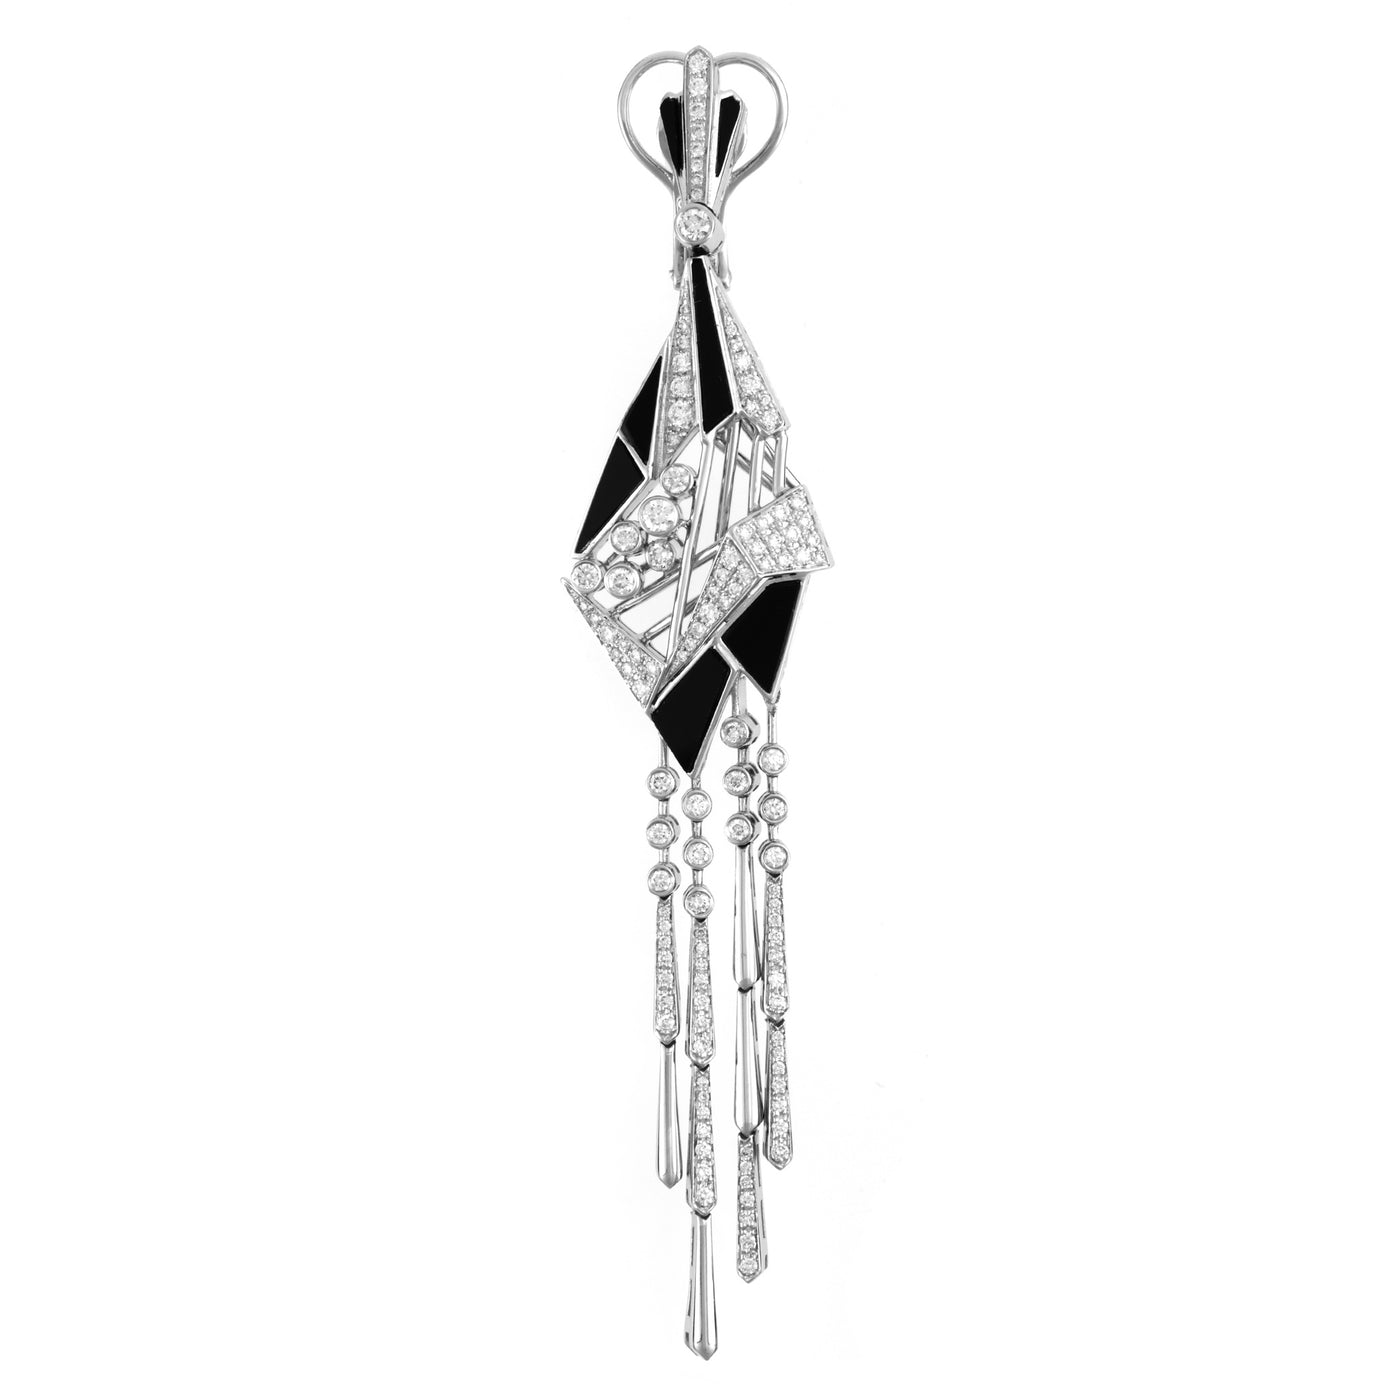 Soit Belle White Gold Pointed Tassel Diamond Earrings With Black Onyx: Bold and Chic